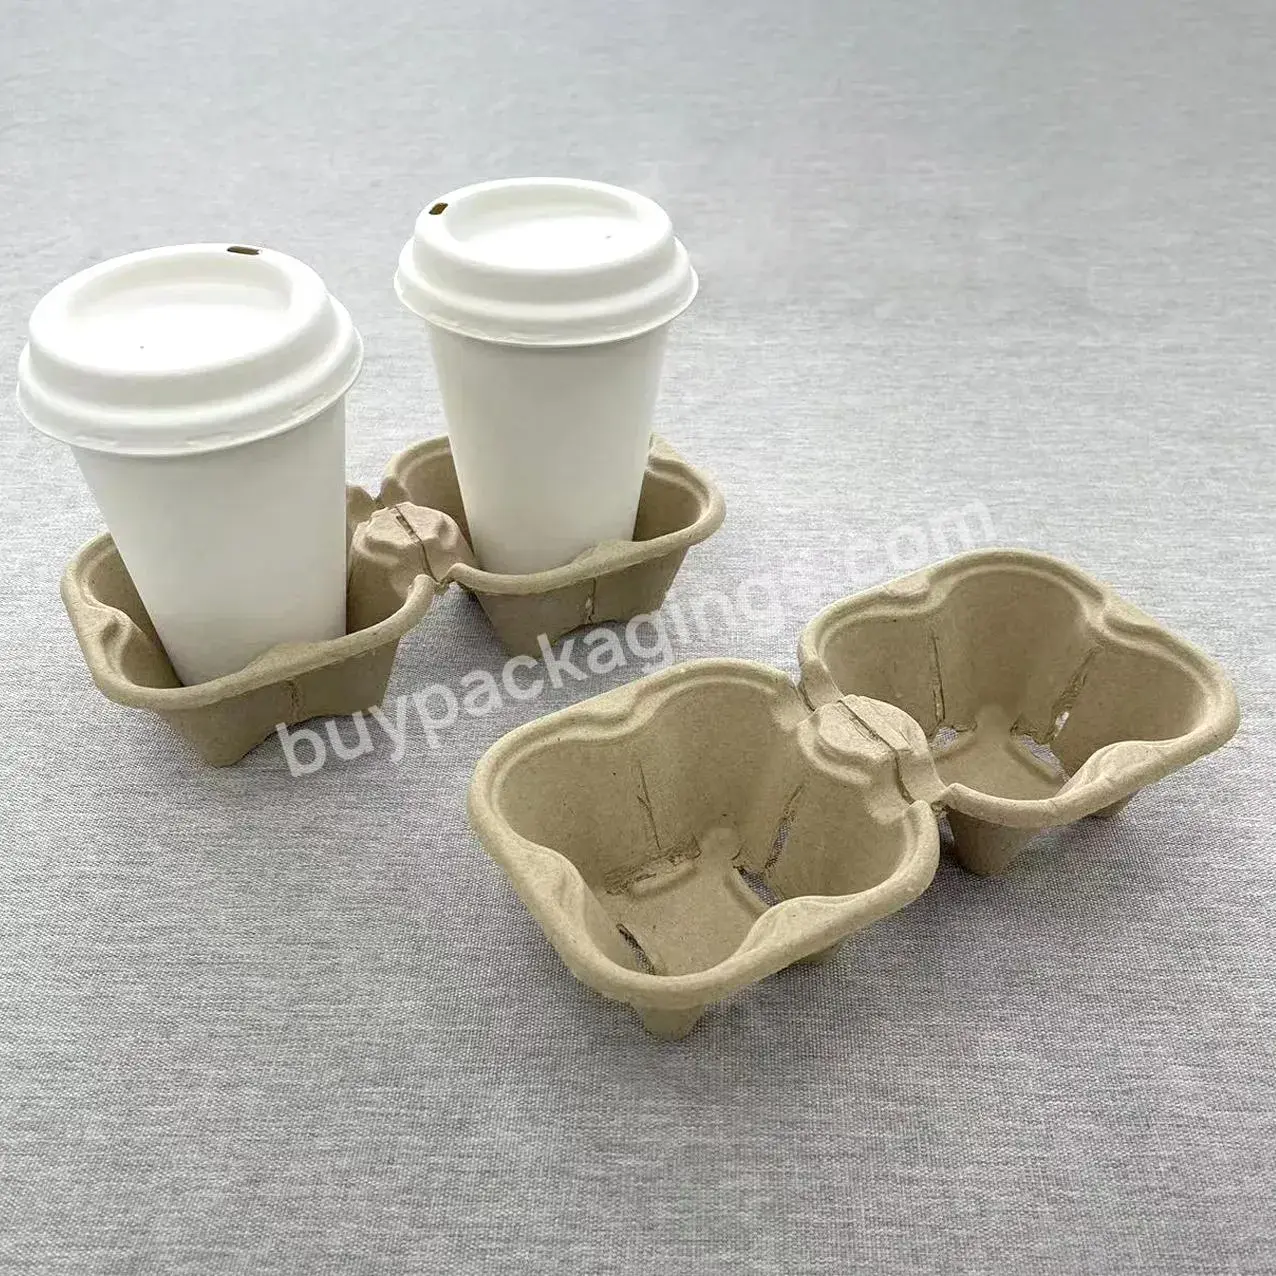 Takeout Restaurant Supplies Pulp Coffee Tray Paper Pulp Sugarcane 2 Cups Holder Pulp Mold Packaging - Buy Pulp Coffee Tray,Paper Pulp Cup Holder,Sugarcane 2 Cups Holder.